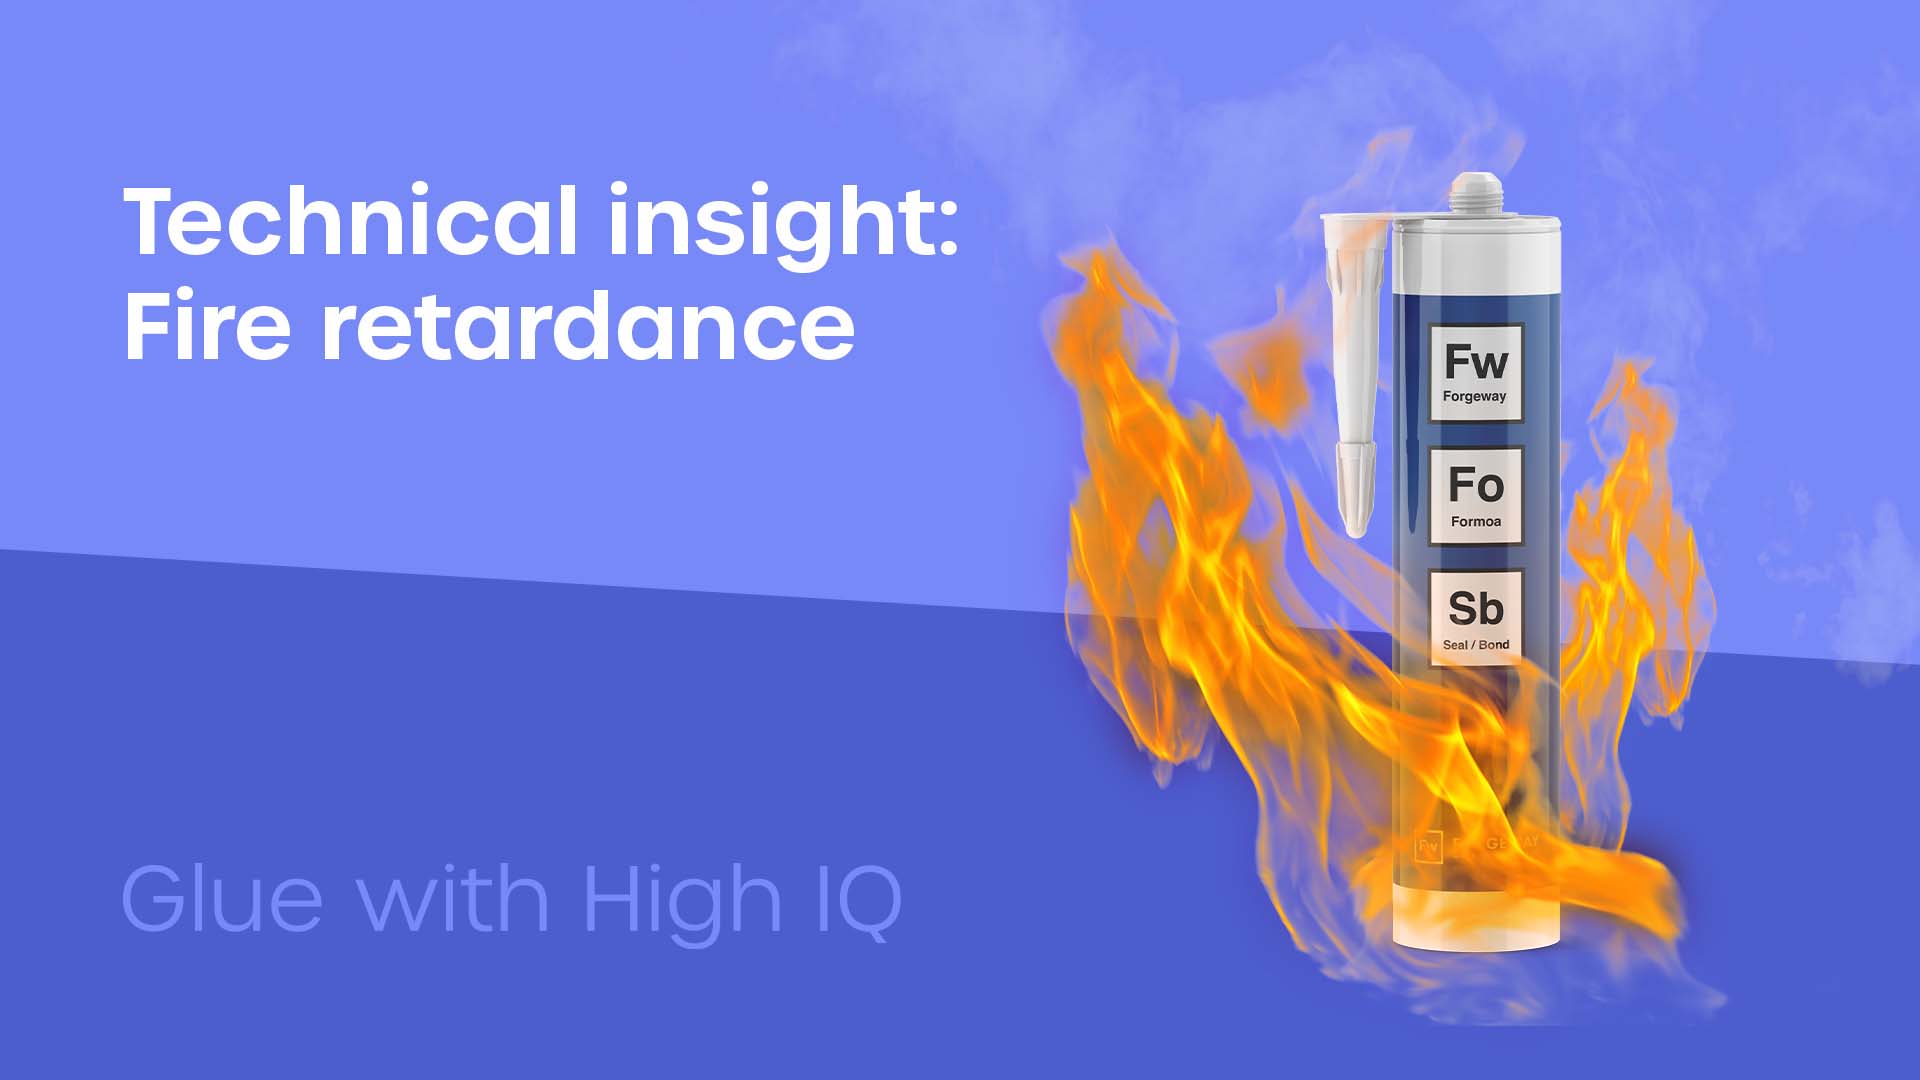 Technical insight into fire rating of adhesives